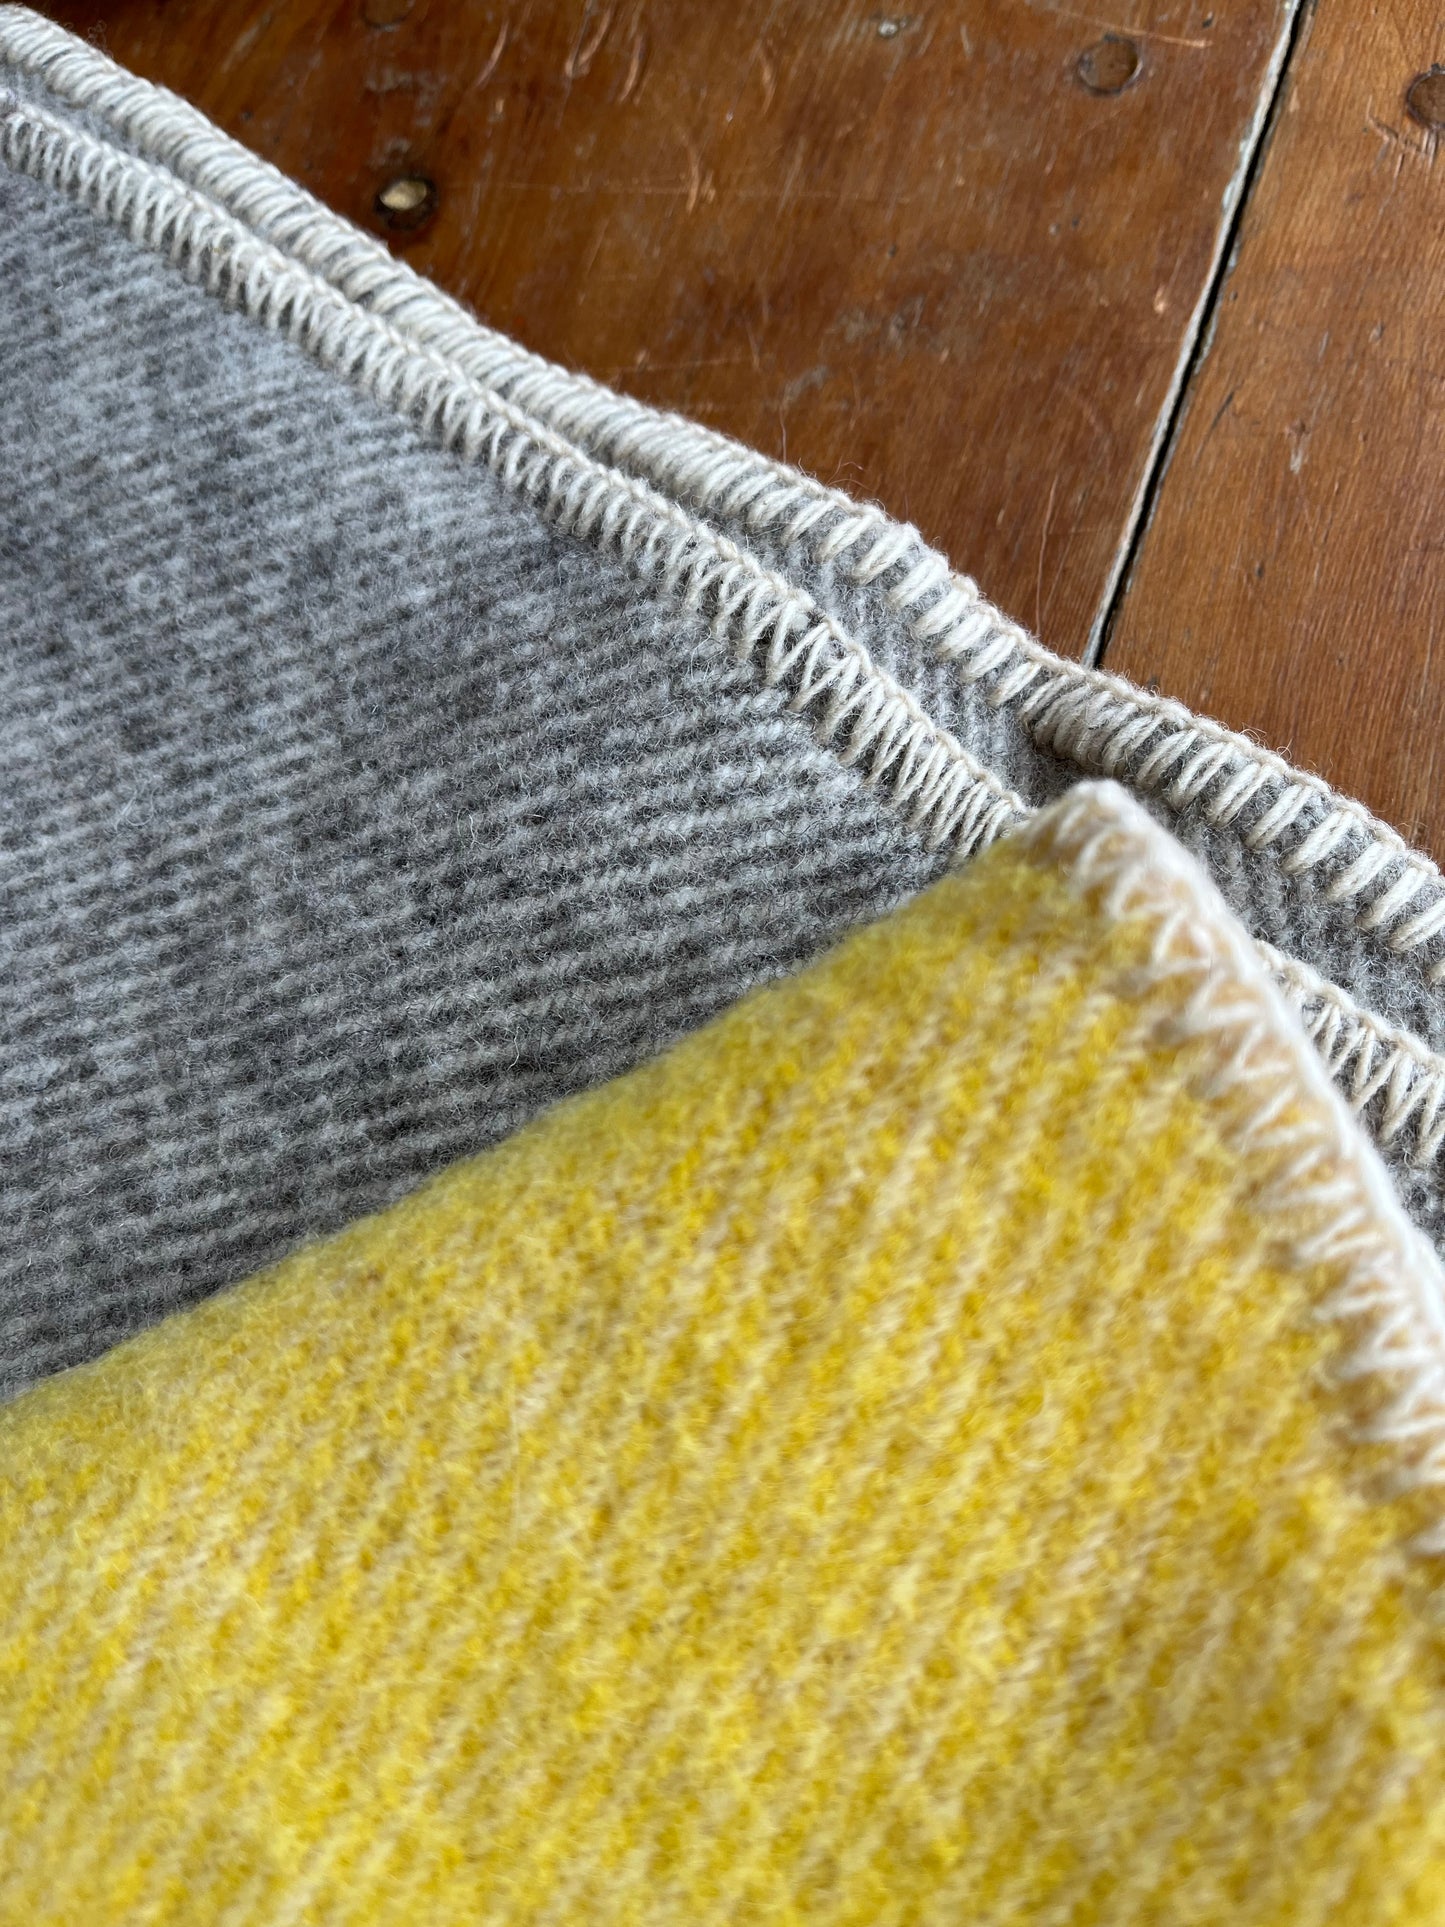 Wool BLANKETS FOR CHILDREN, Adults & Baby too… 12 colour choices!